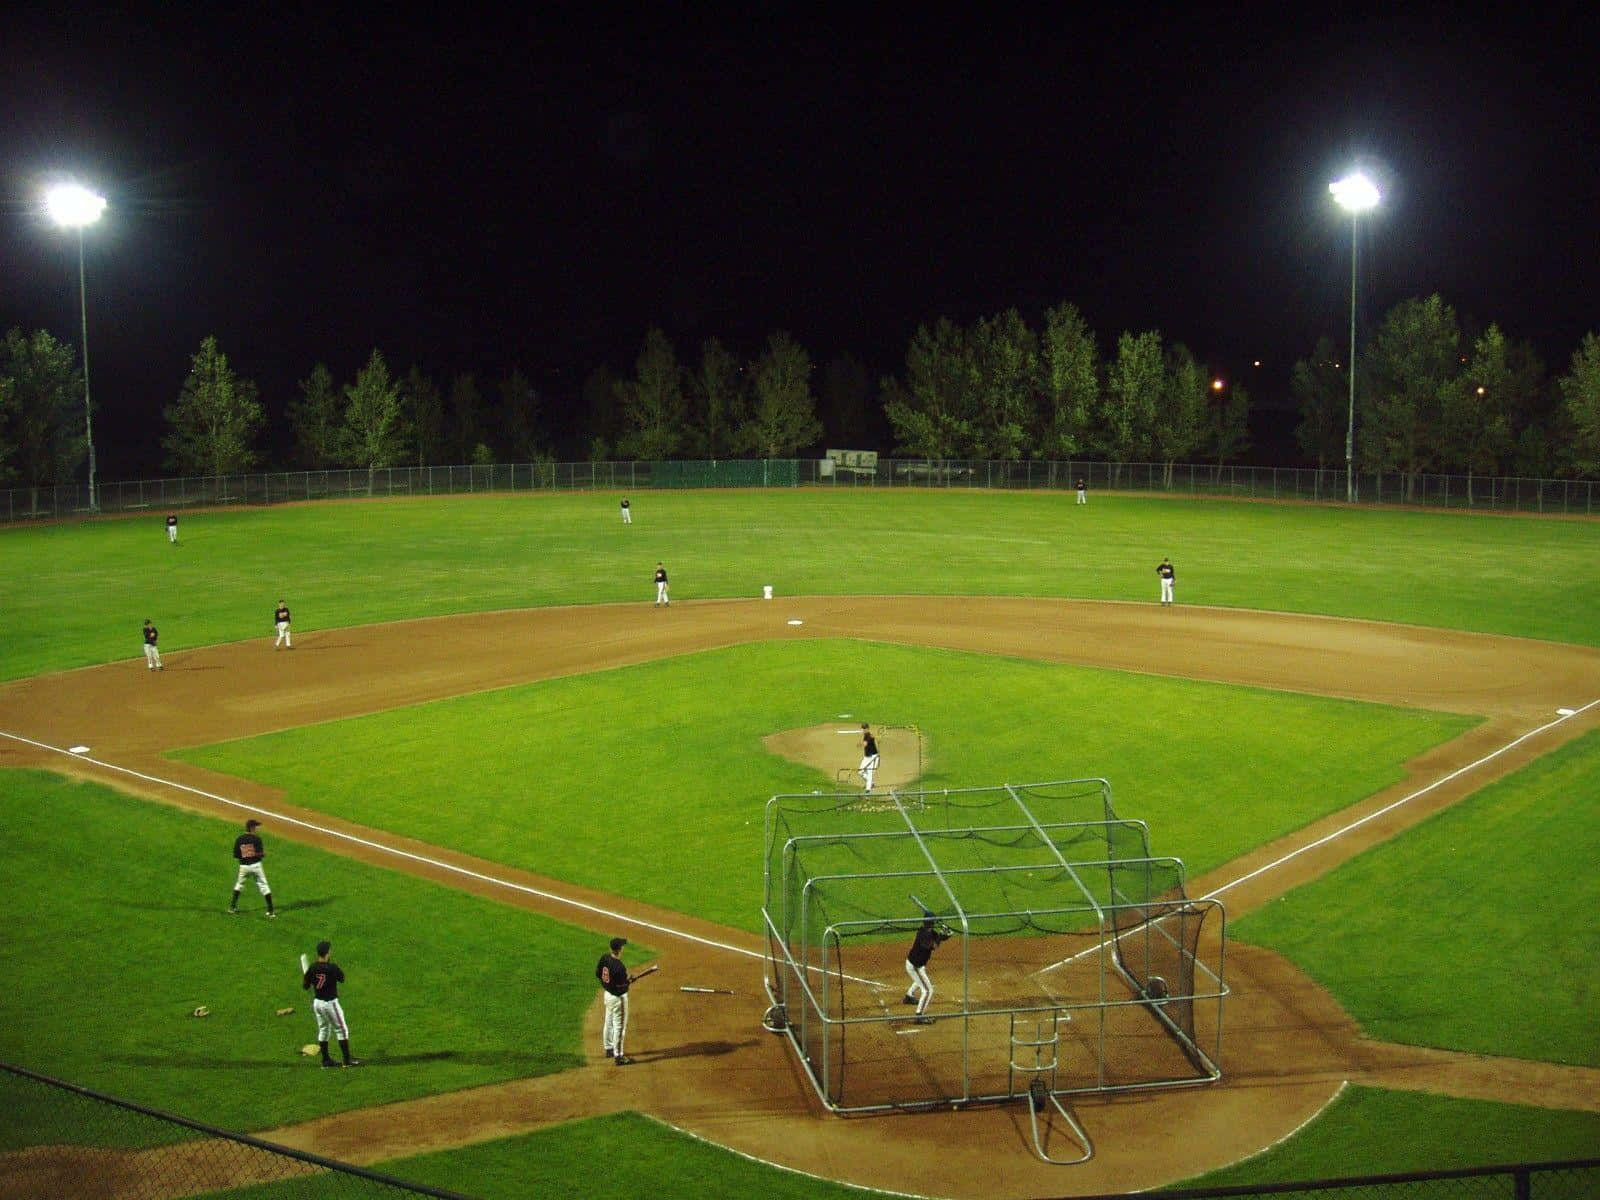 Enjoy the beautiful view of a traditional baseball field